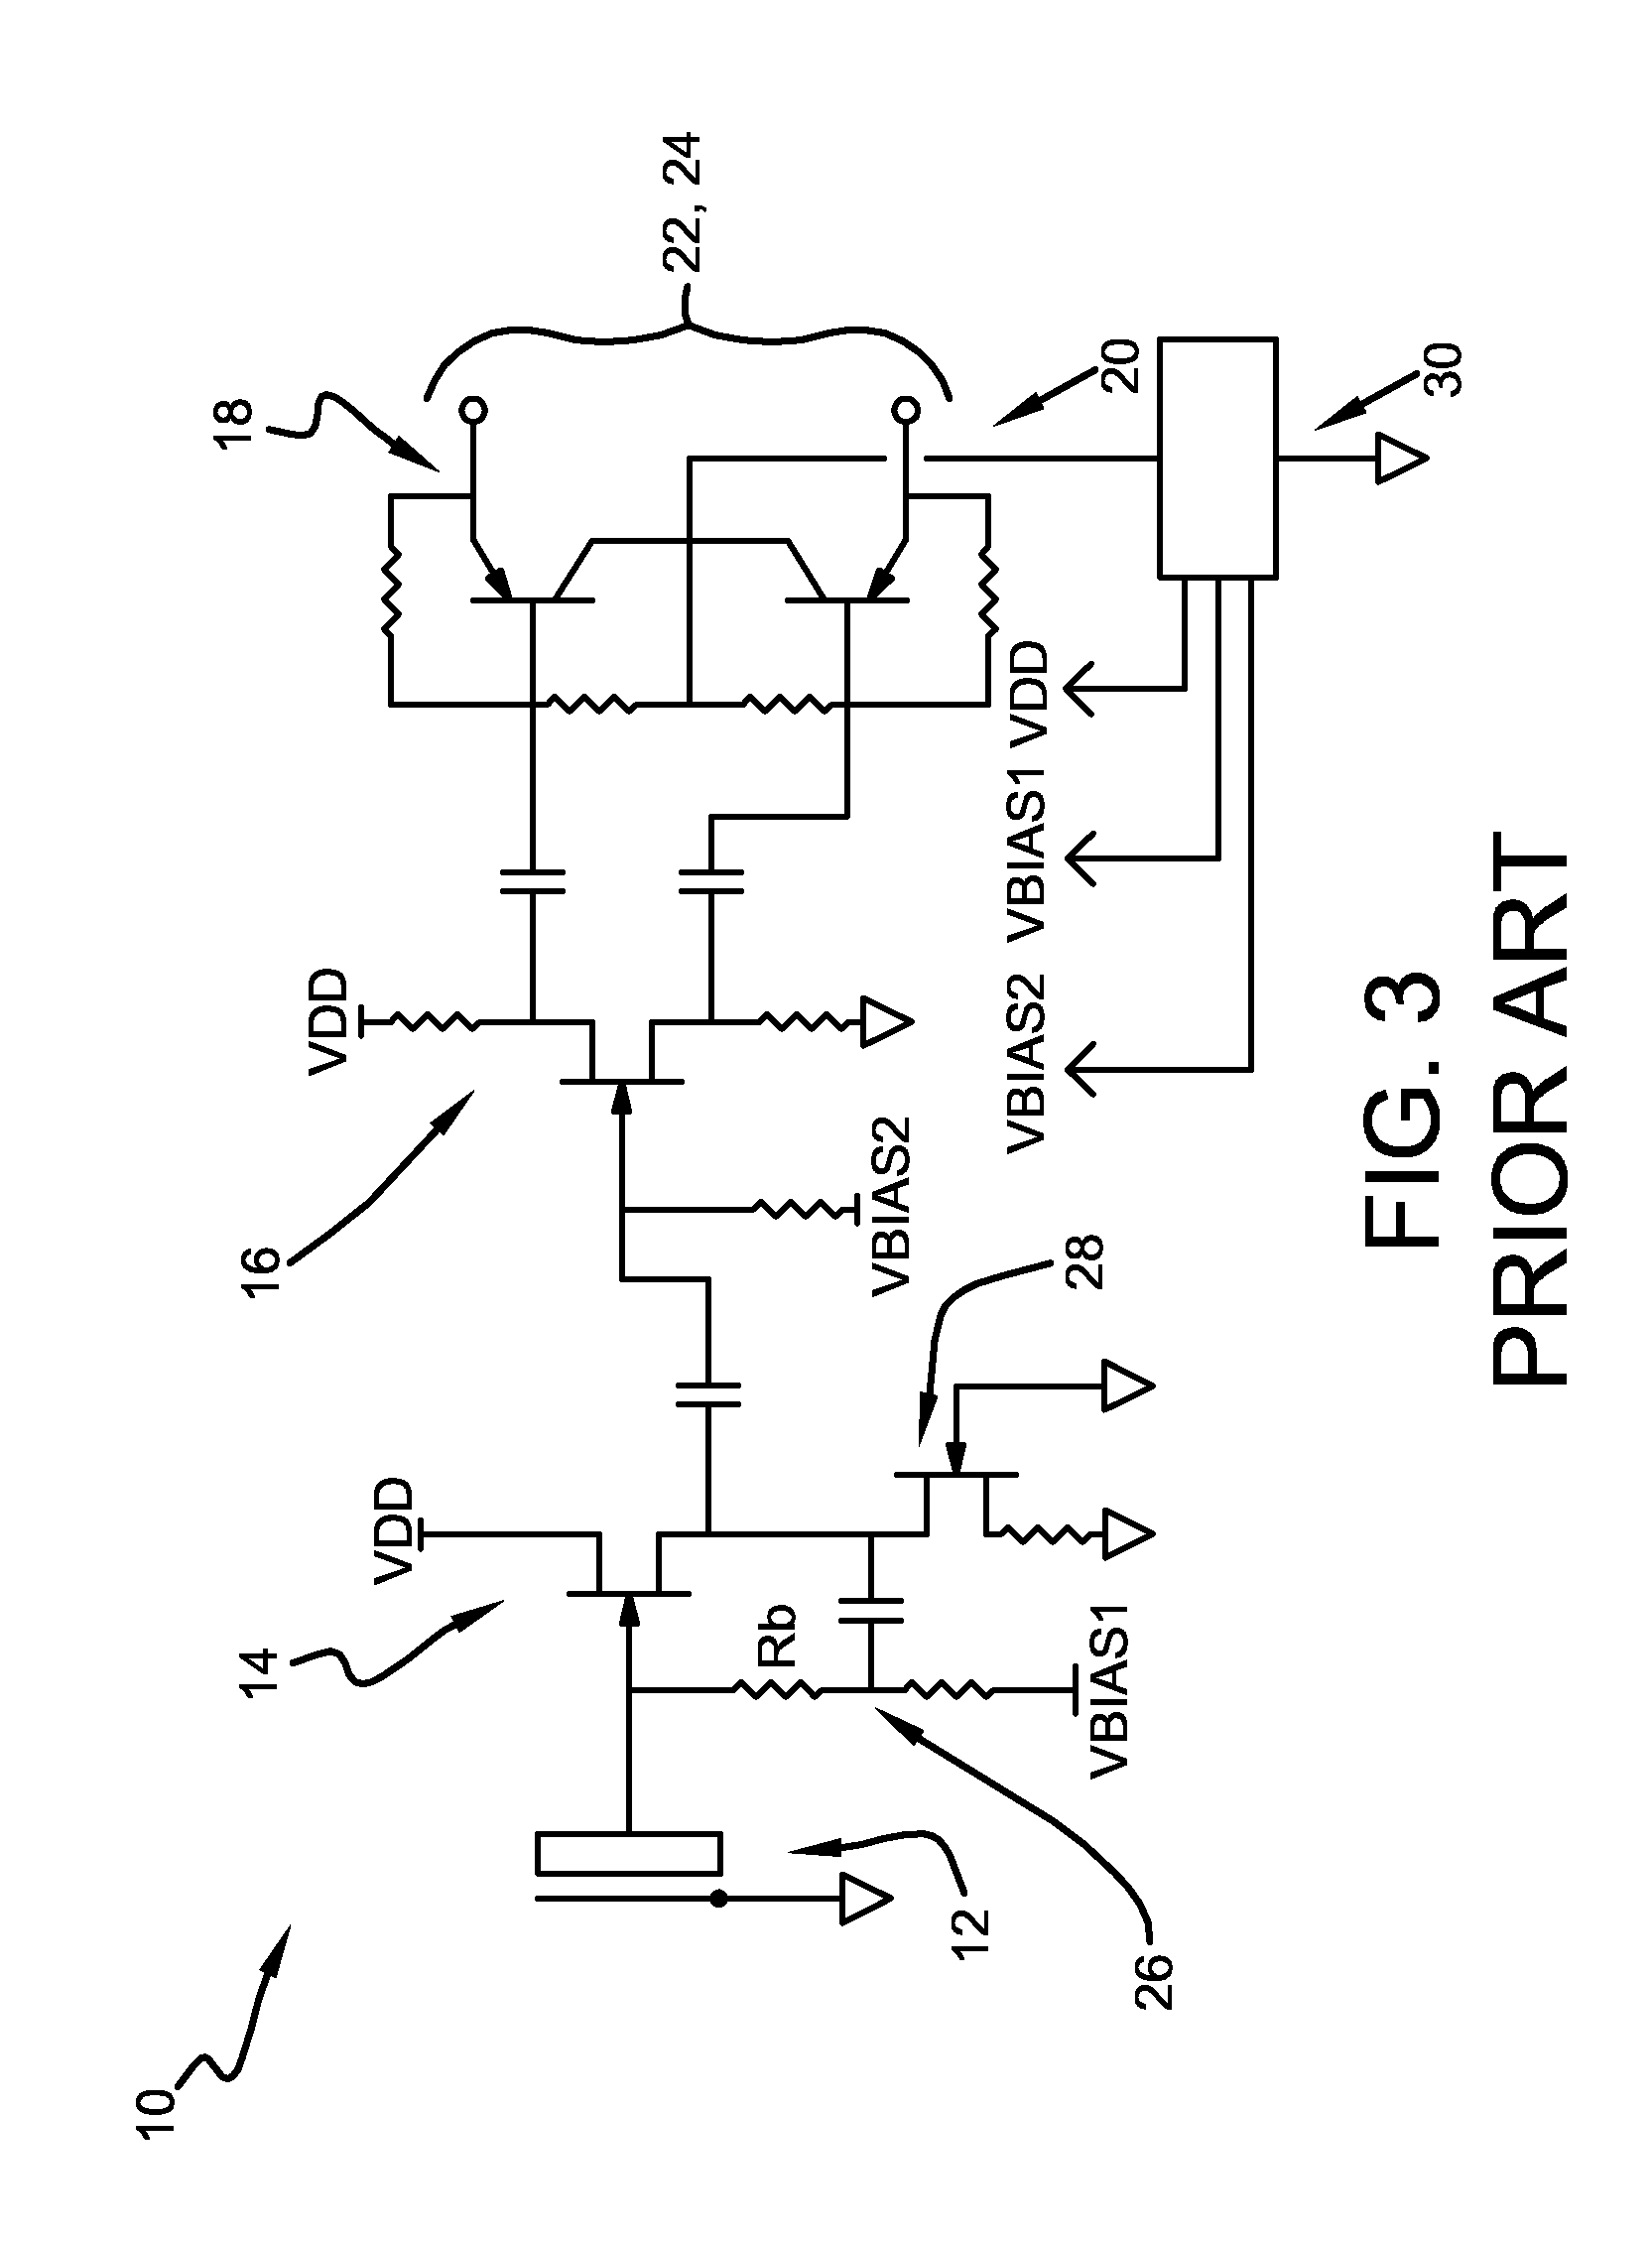 Fully differential low-noise capacitor microphone circuit